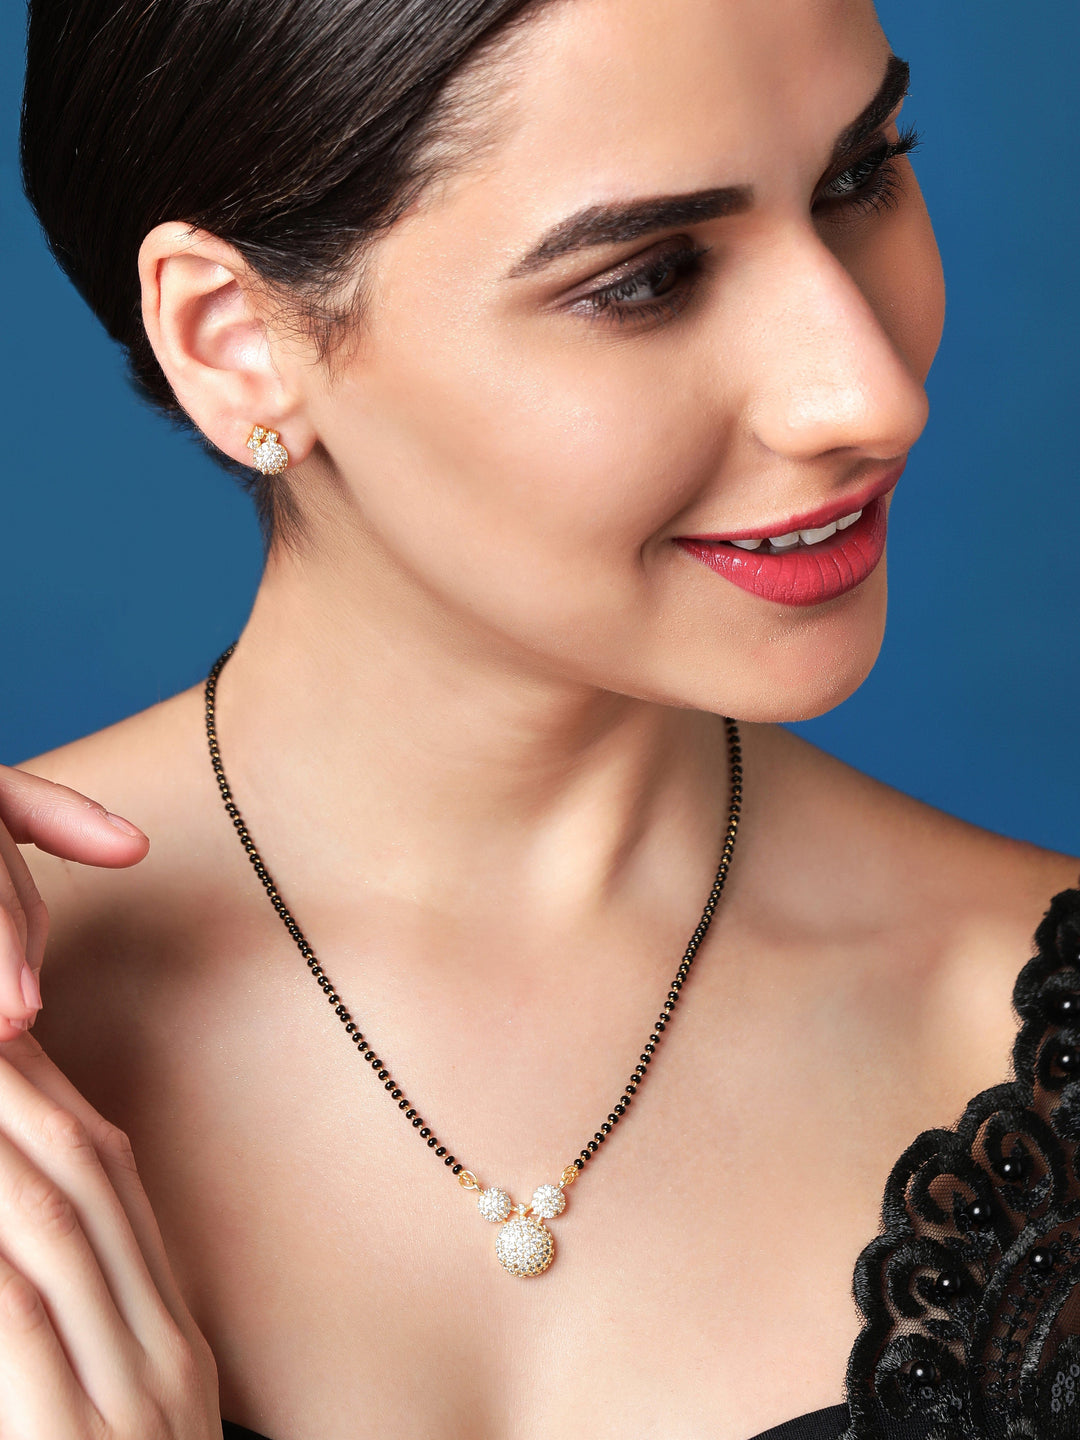 18 KT Gold Plated Zirconia Studded Mangalsutra Necklaces, Necklace Sets, Chains & Mangalsutra